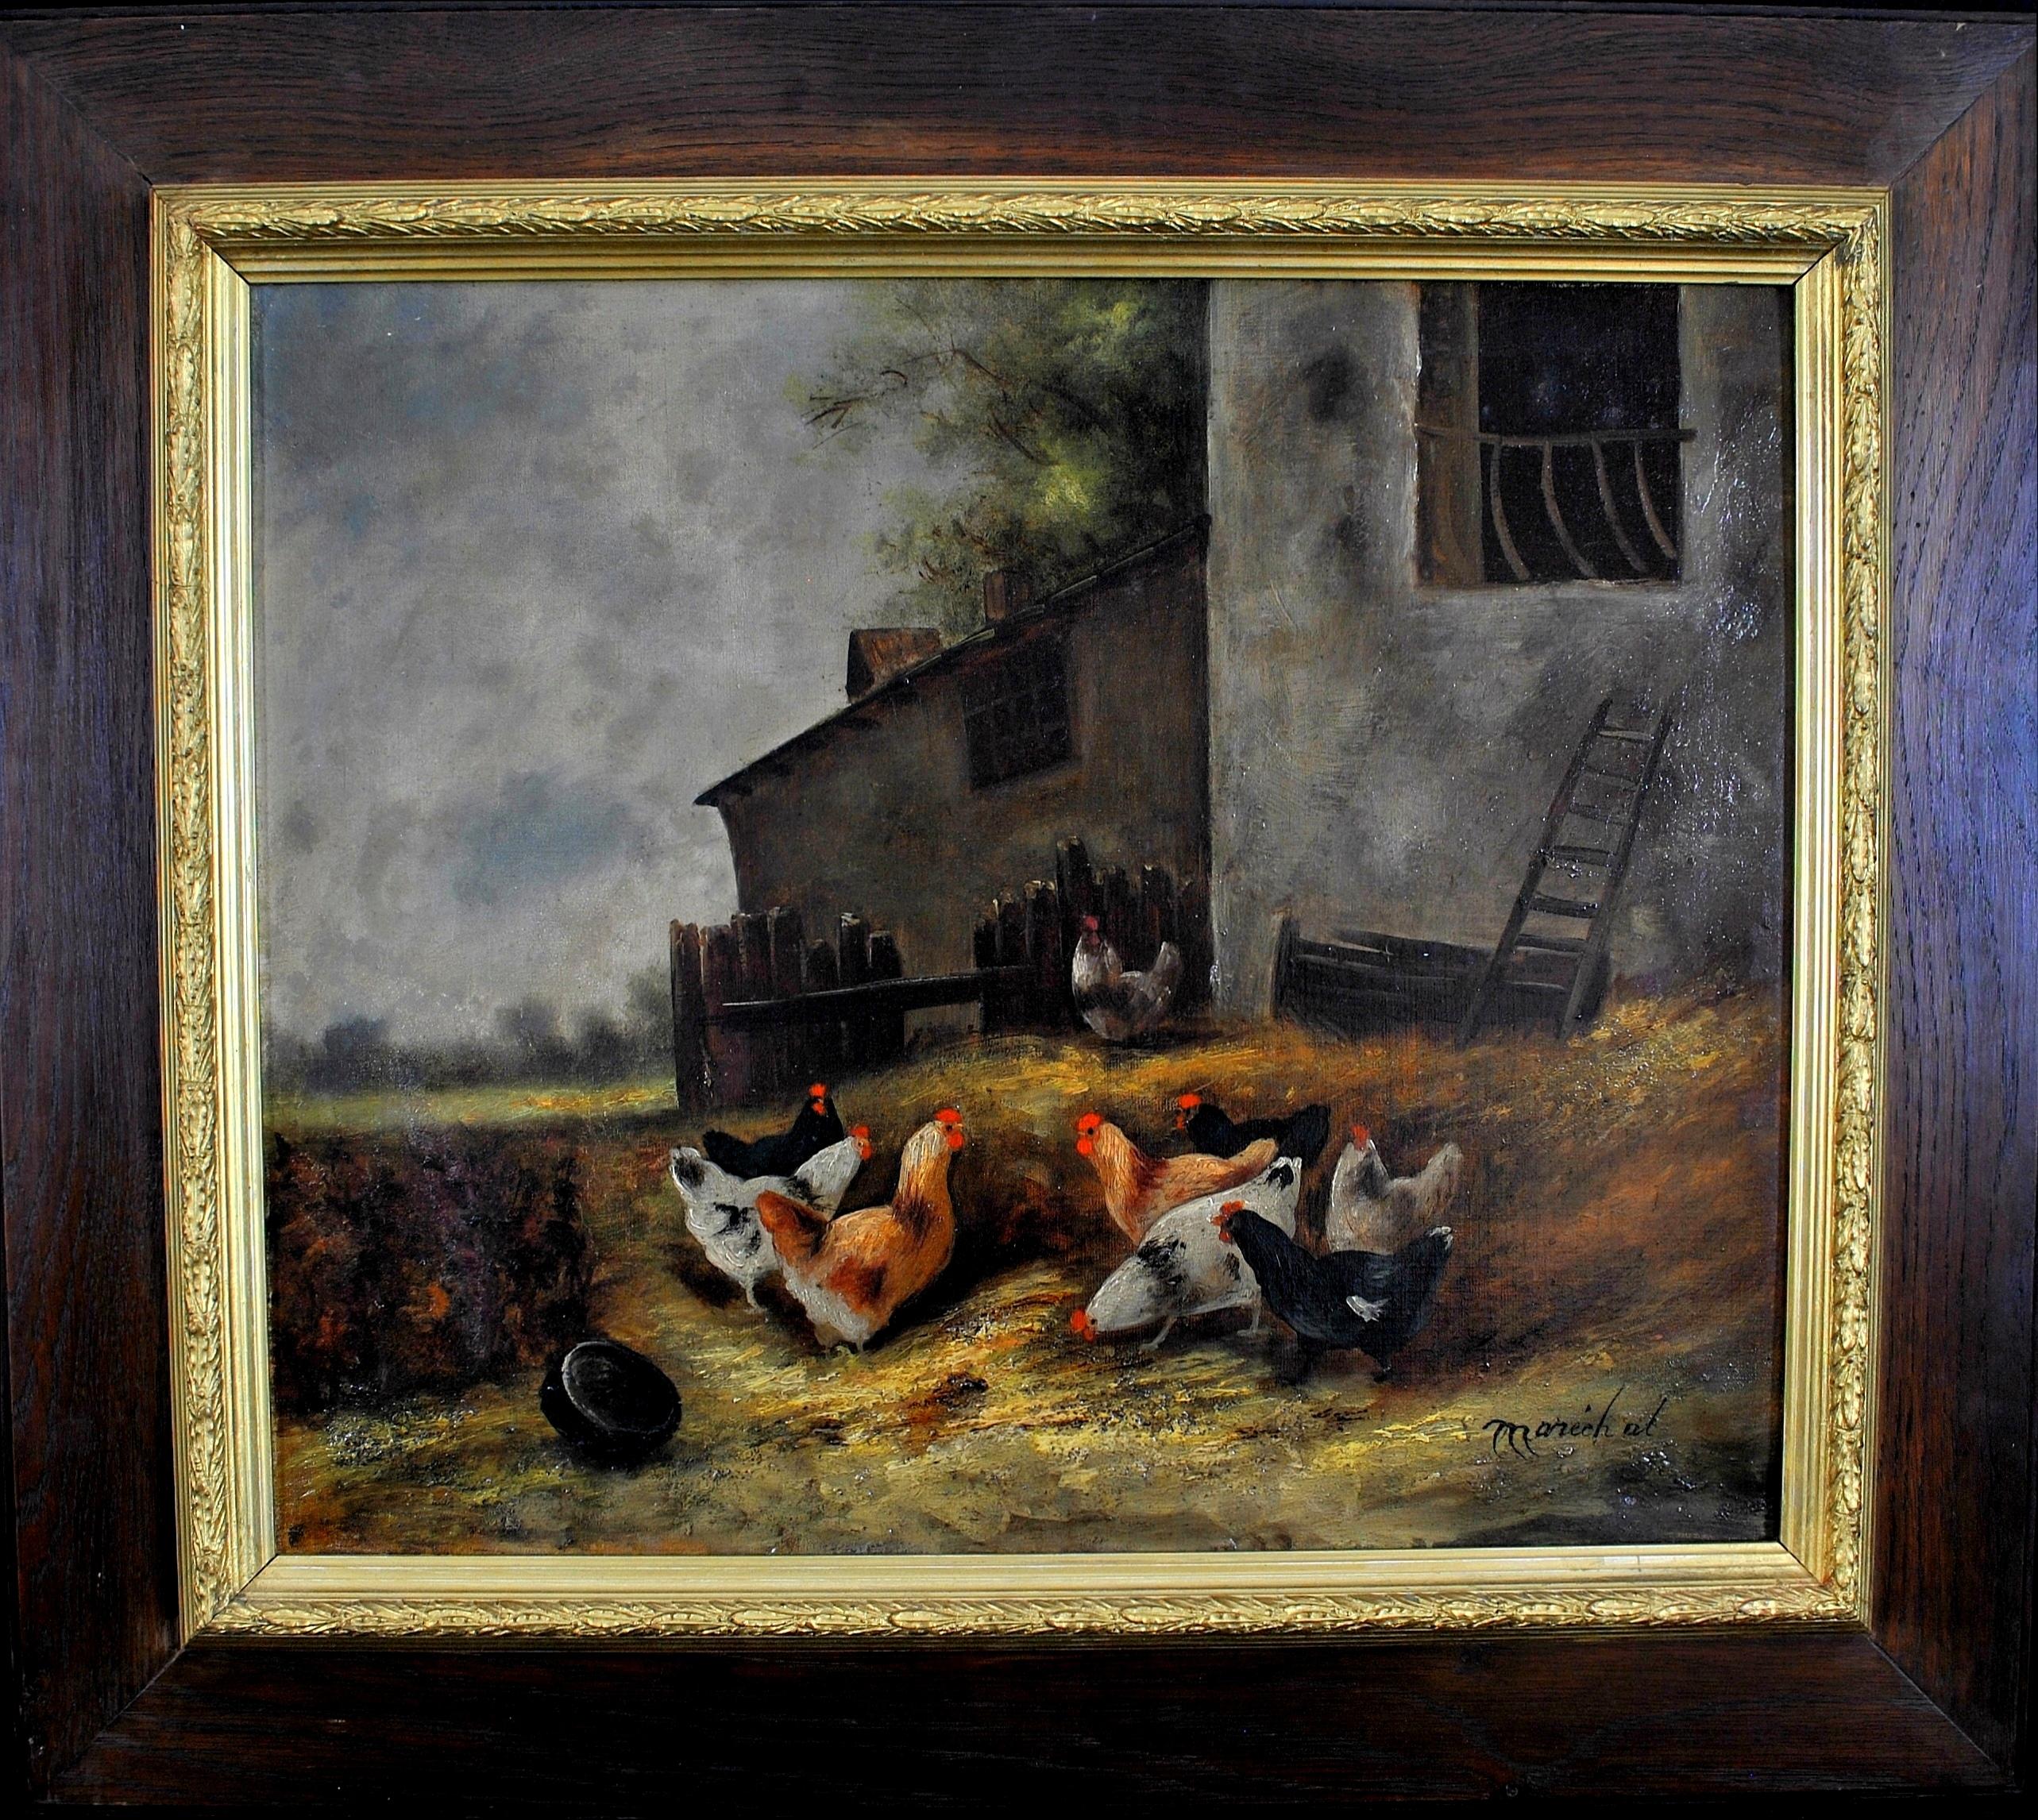 Charles Marechal Animal Painting - Chickens in a Farmyard - Large 19th Century French Oil on Canvas Painting